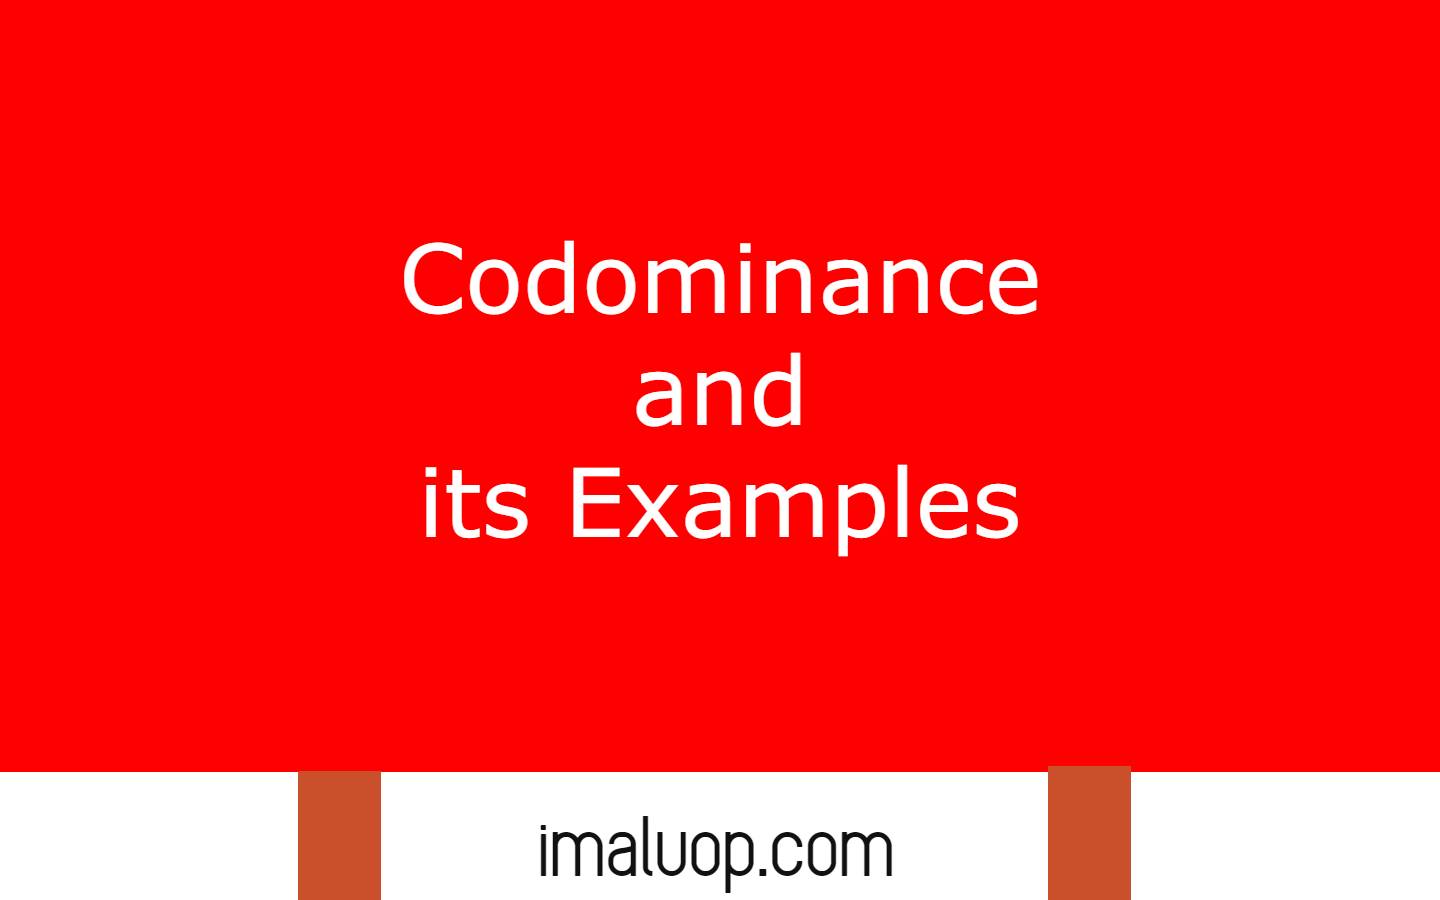 Codominance and its Examples